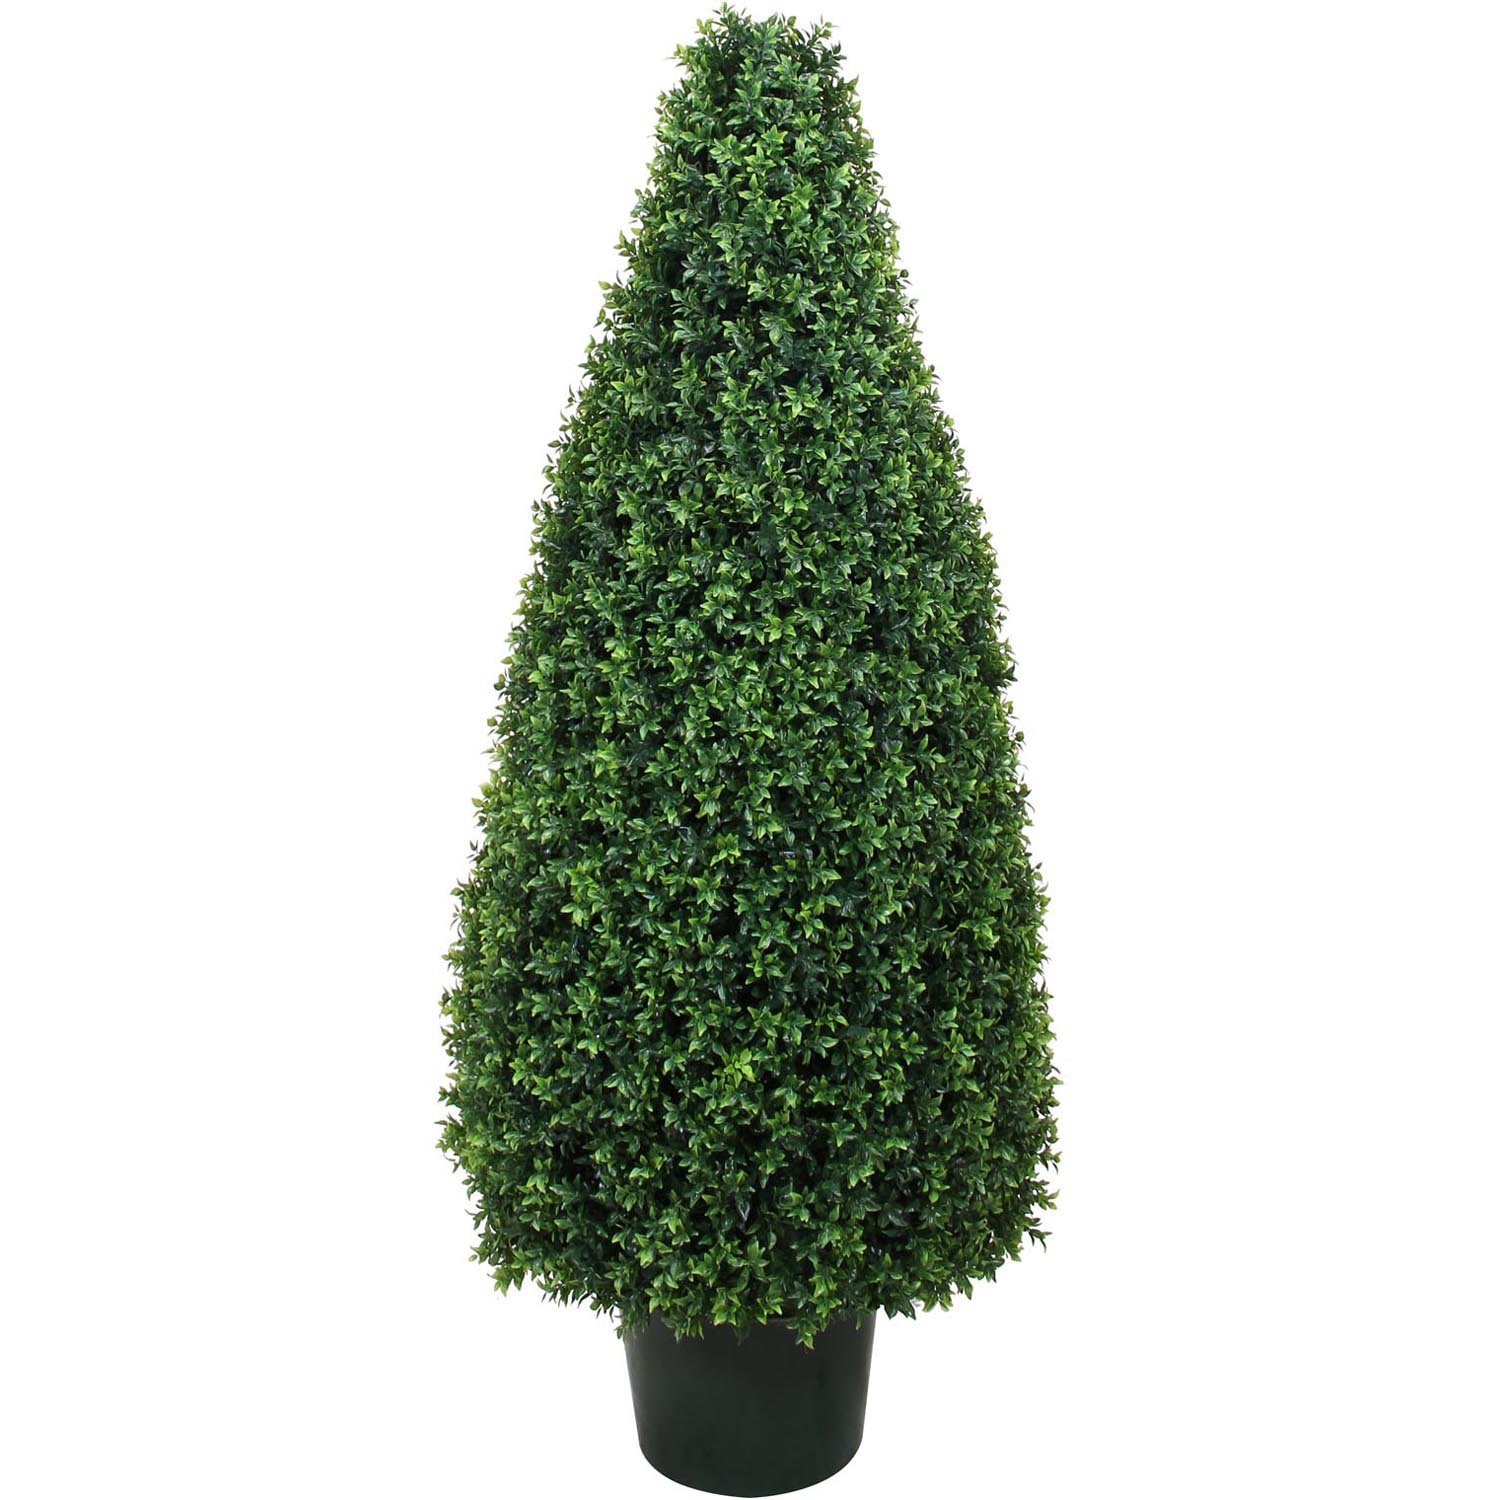 30 Inch Uv Protected Basil Cone Topiary: Potted